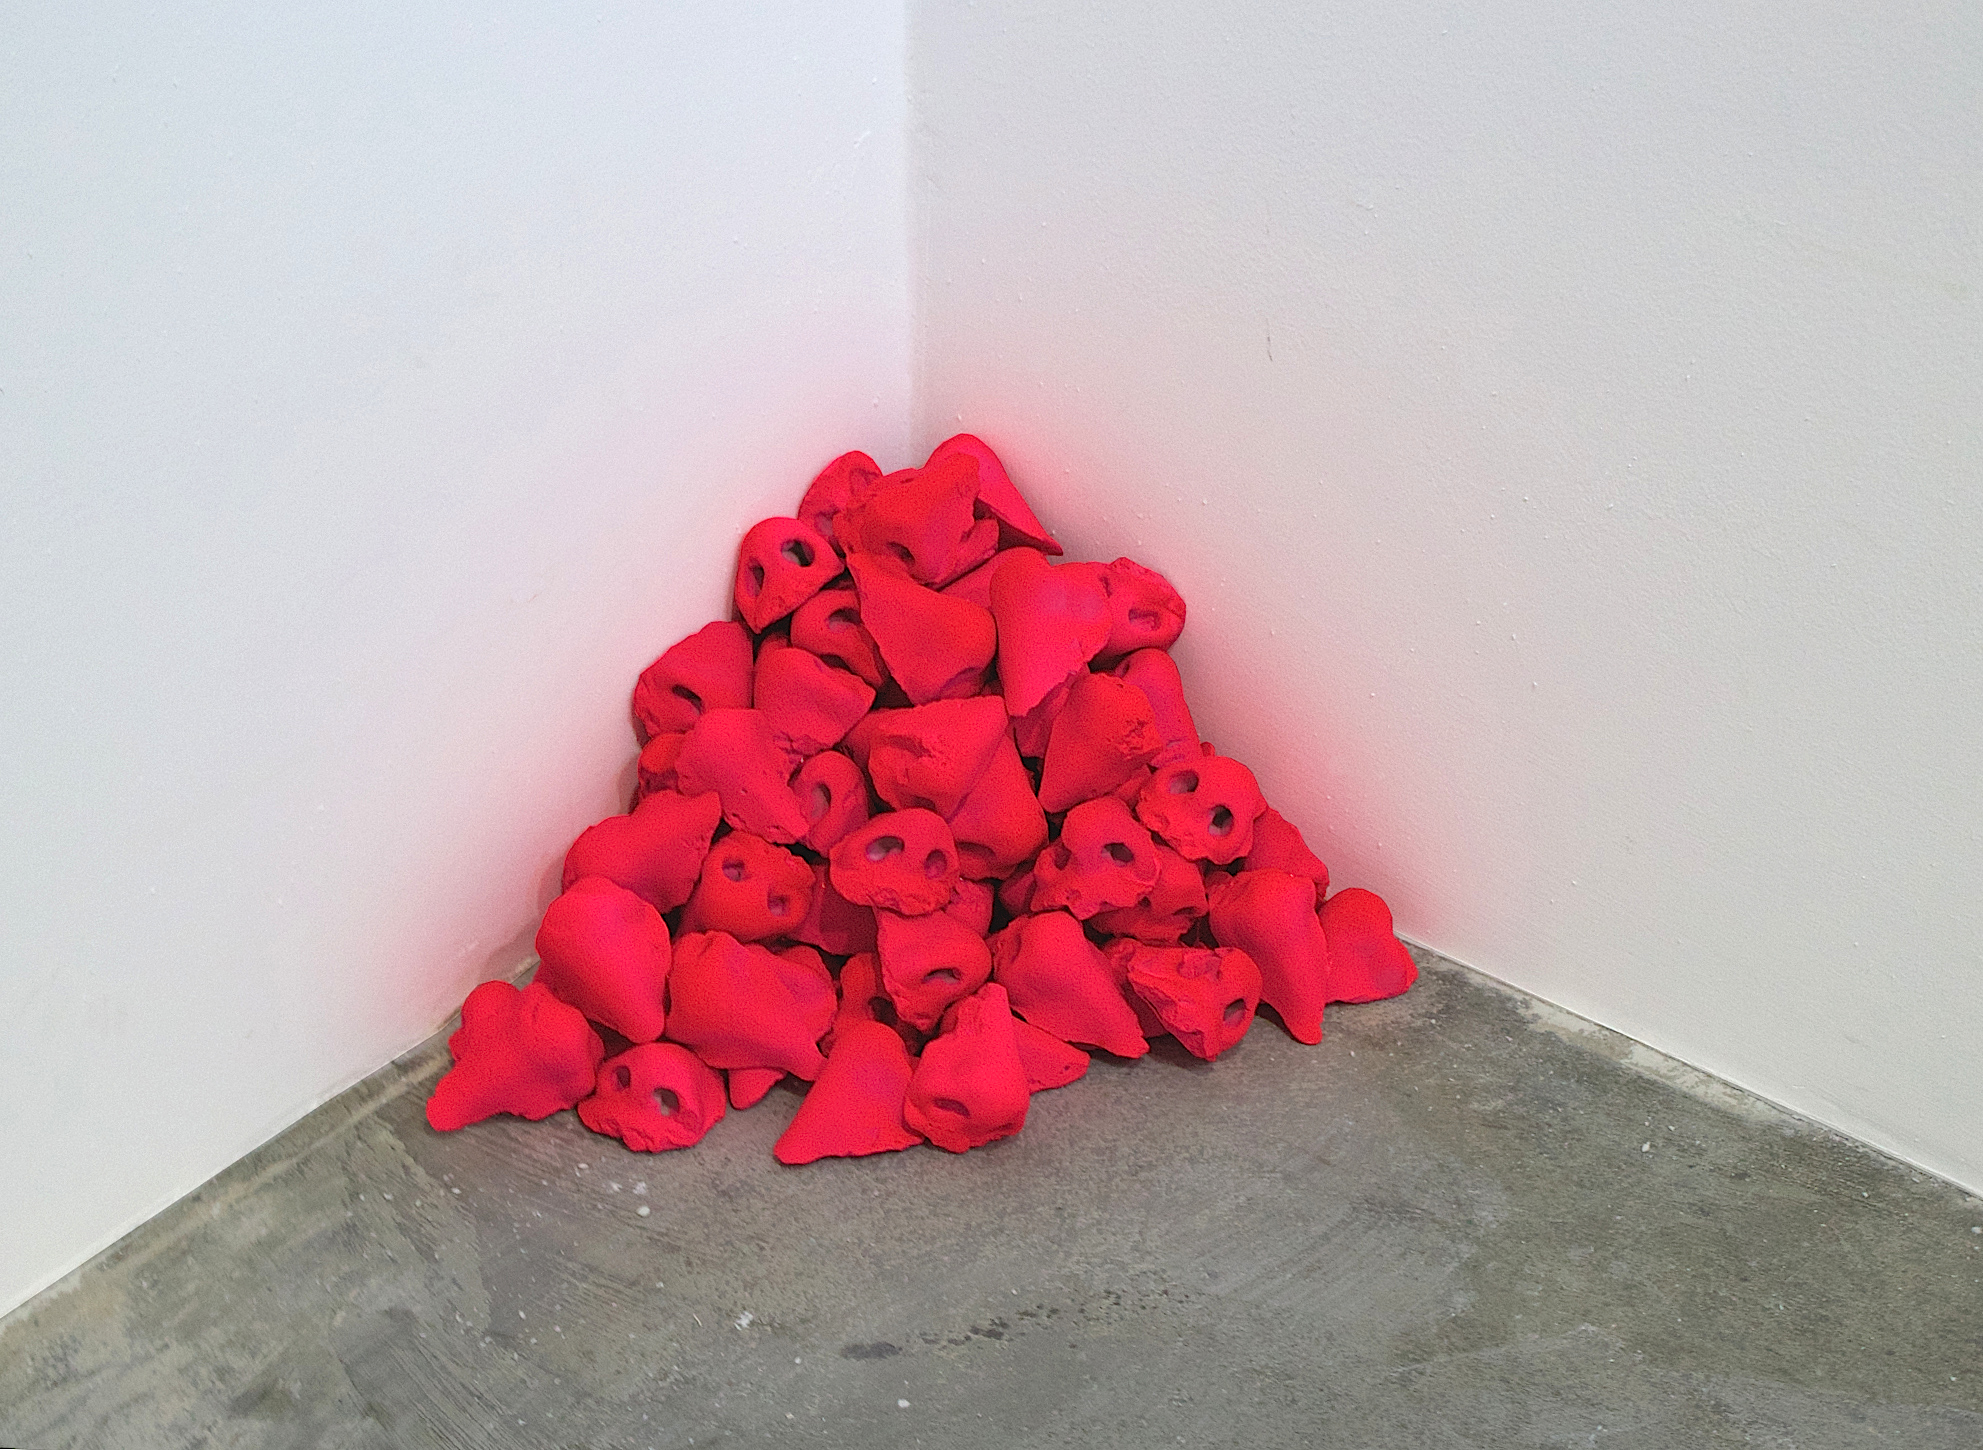 Untitled (Pile of Noses)